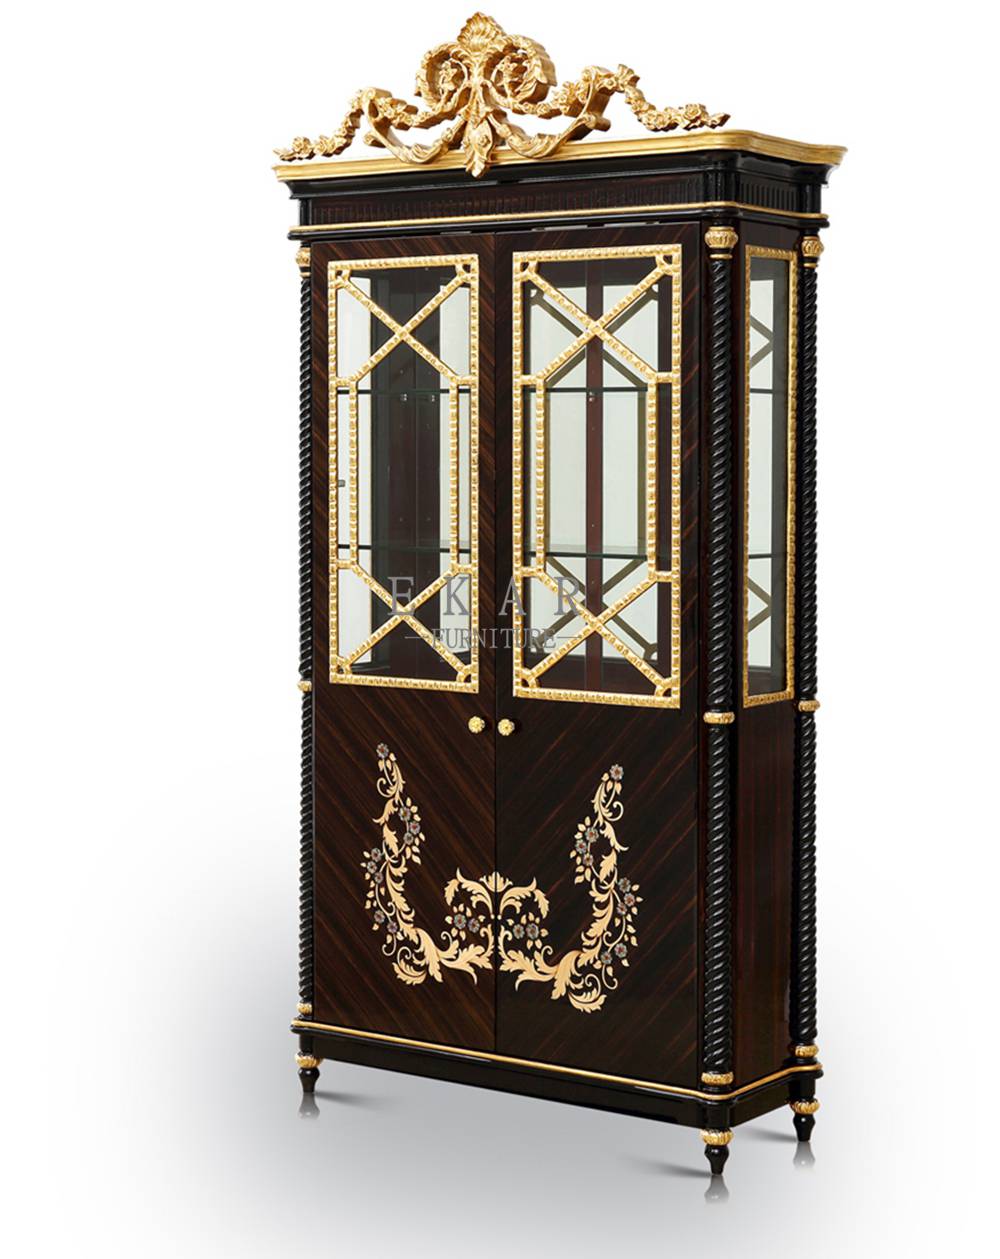 Alibaba Wholesale Chinese Antique Furniture Liquor Glass Cabinets